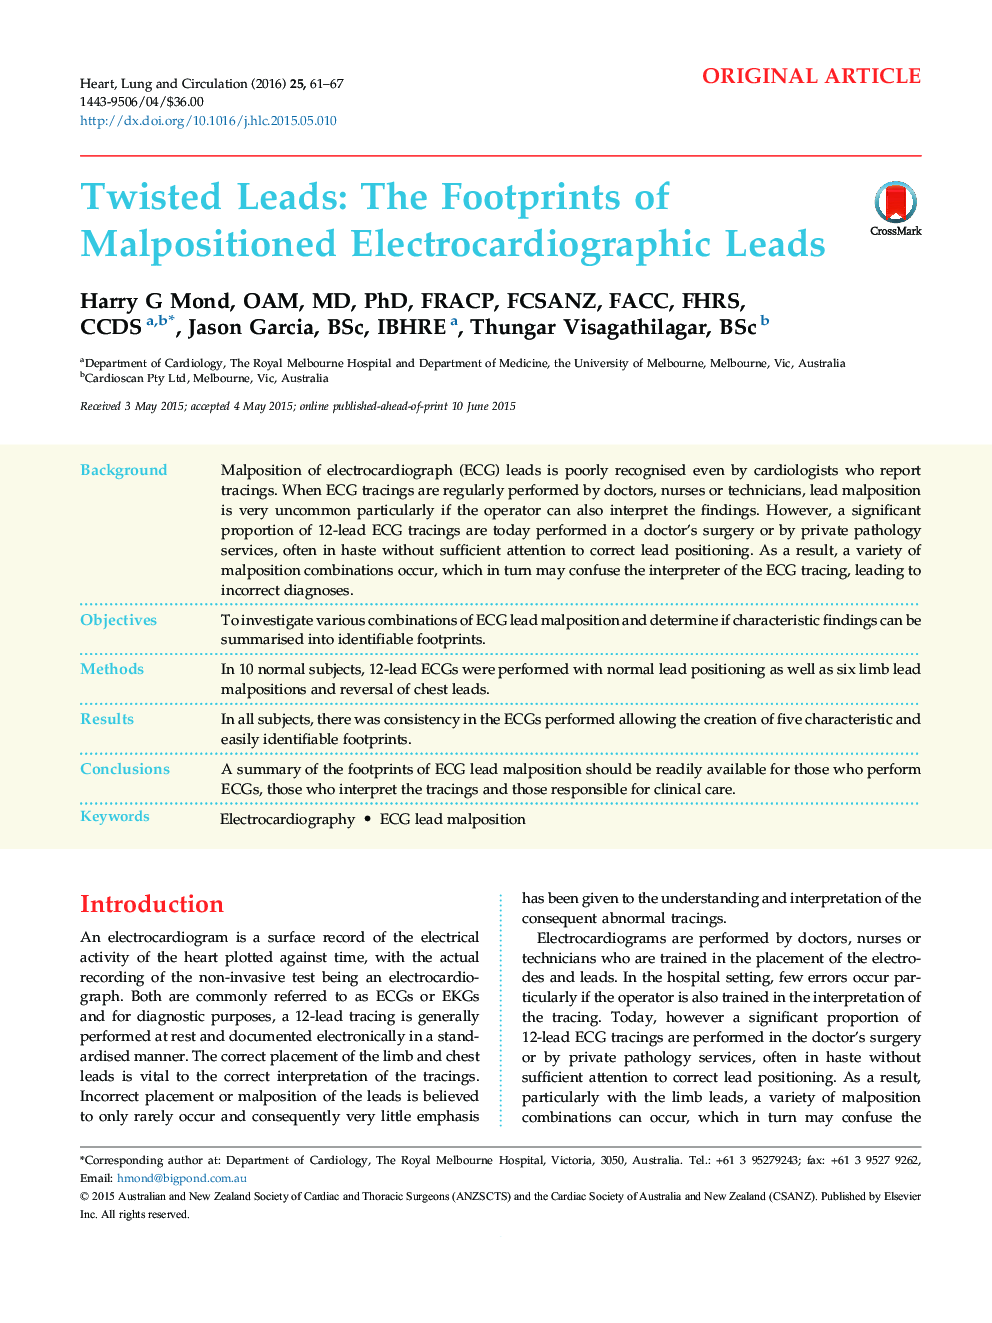 Twisted Leads: The Footprints of Malpositioned Electrocardiographic Leads